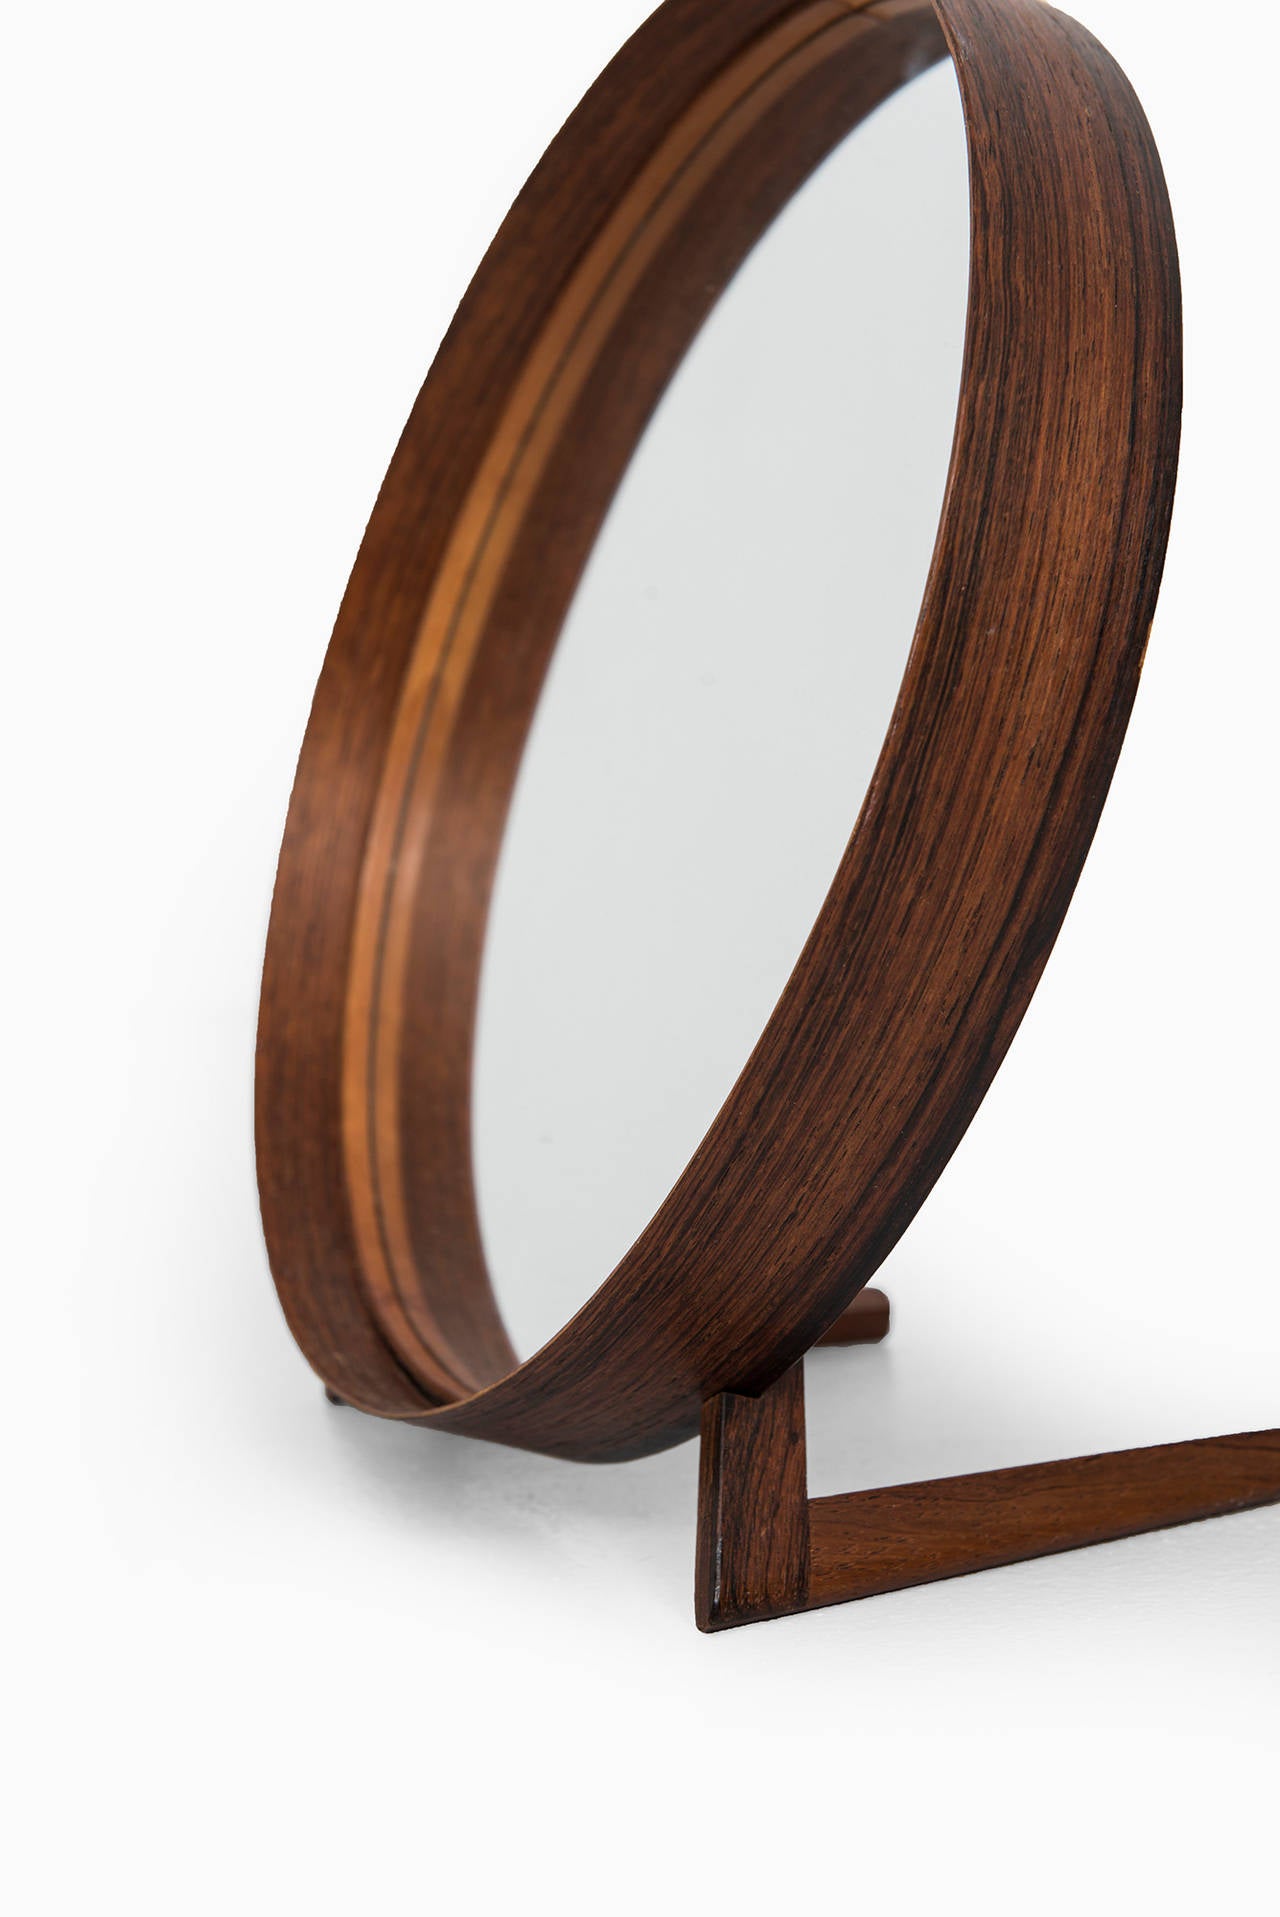 Rare table mirror in rosewood and brown leather designed by Uno & Östen Kristiansson. Produced by Luxus in Vittsjö, Sweden.